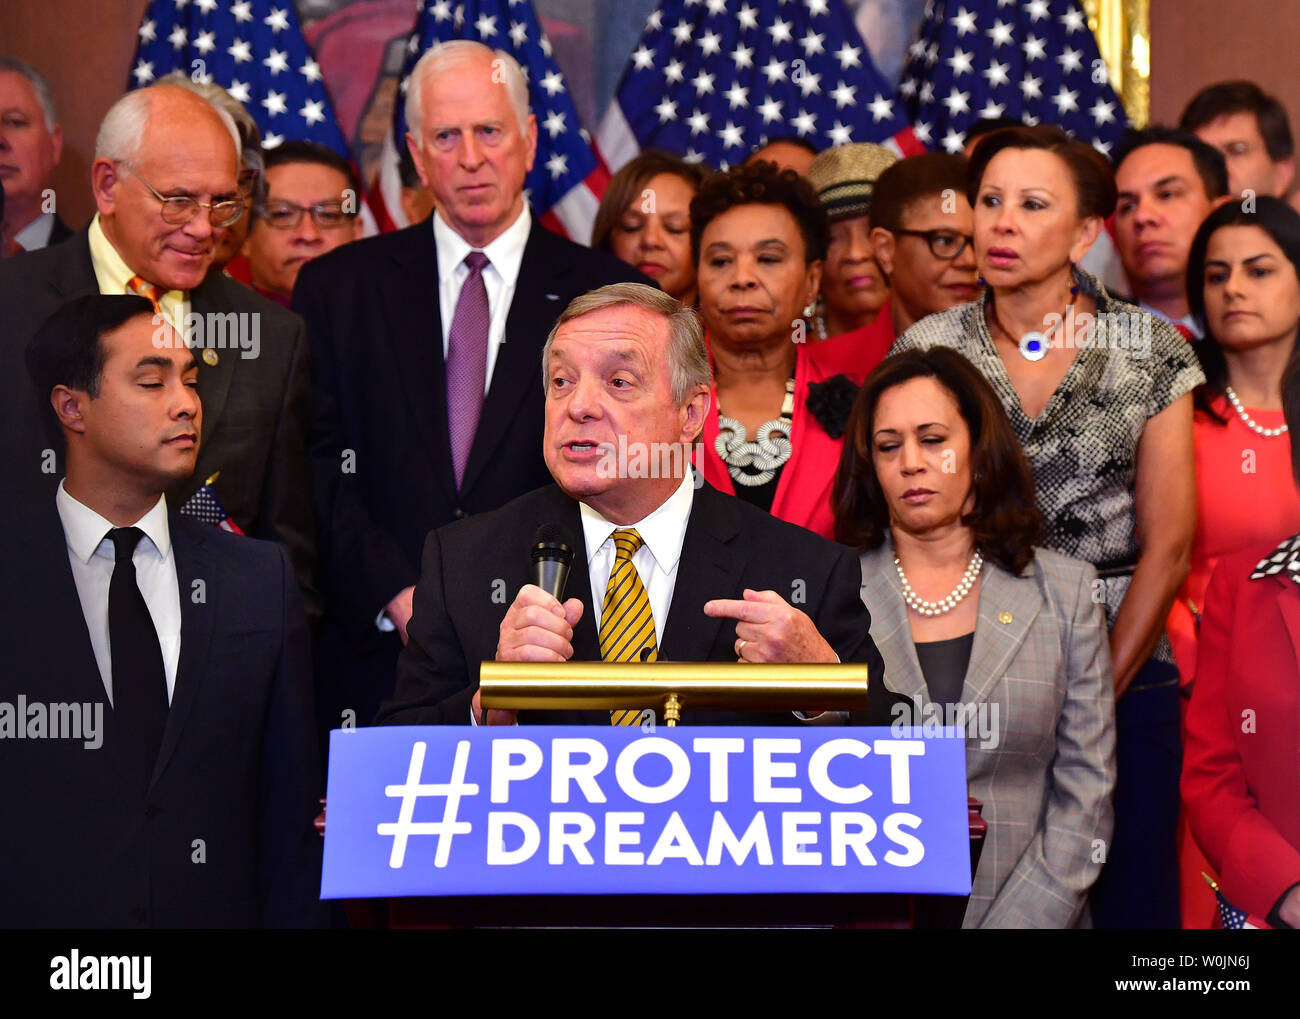 Senate Minority Assistant Leader Richard Durbin, D-IL, speaks alongside fellow Democratic Senators and Representatives at a press conference calling on Congressional Republicans to stop the wind down of the Deferred Action for Childhood Arrivals (DACA) initiative at the U.S. Caption in Washington, D.C. on September 6, 2017. Photo by Kevin Dietsch/UPI Stock Photo